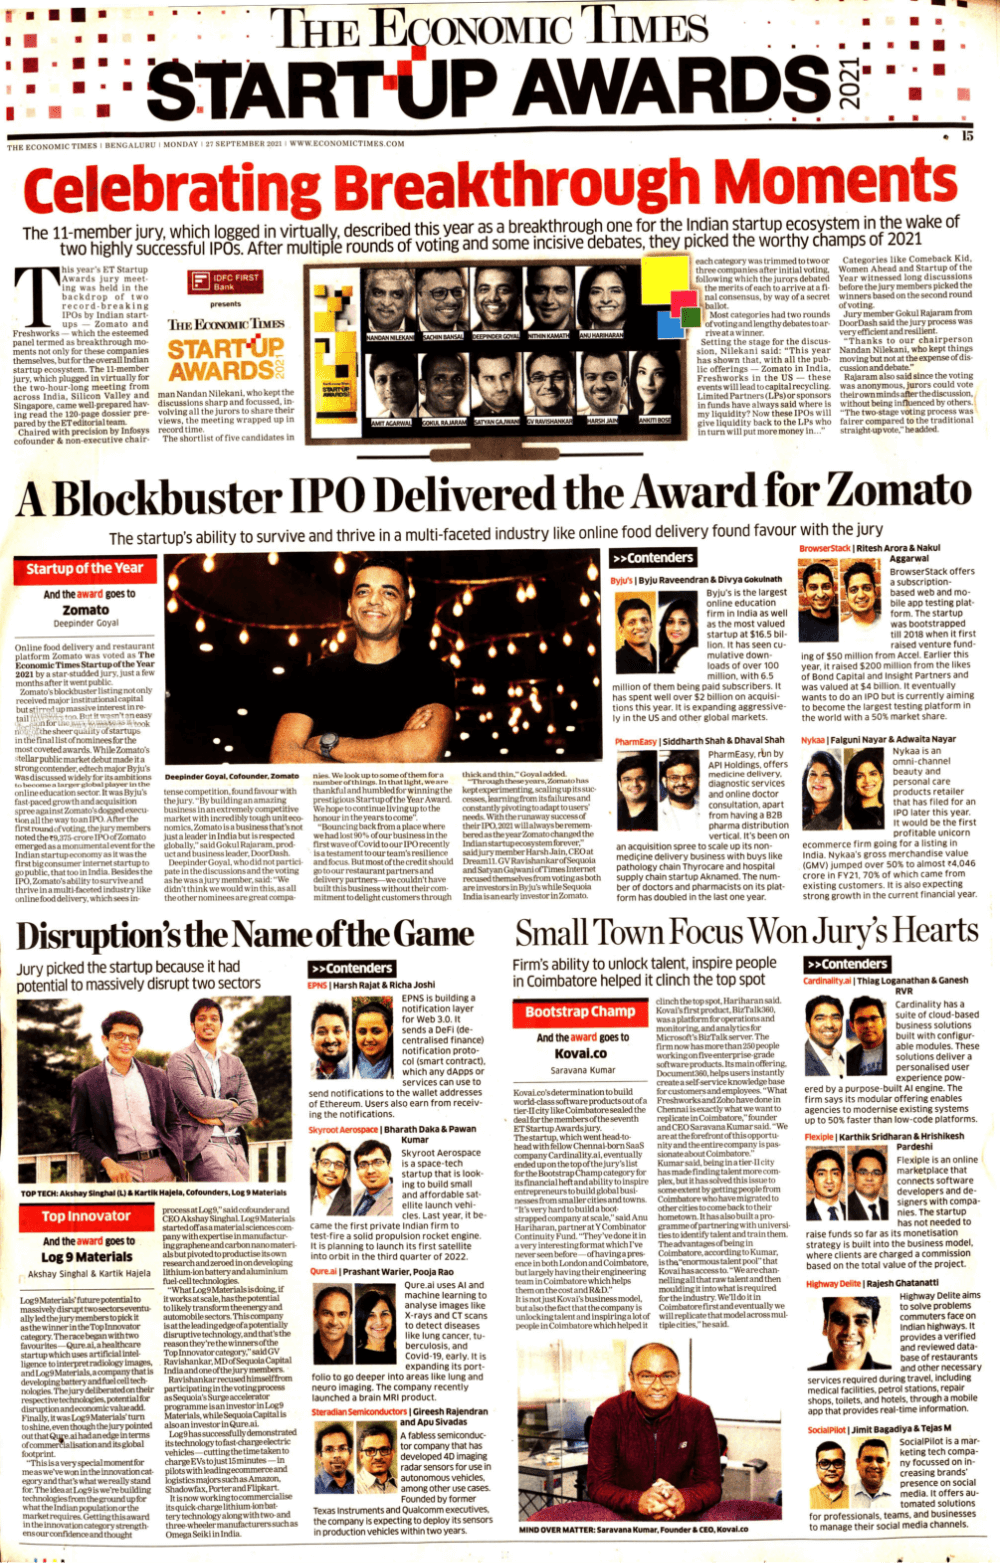 Kovai.co wins the title “Bootstrap Champ” at  the Economic Times Startup Awards 2021